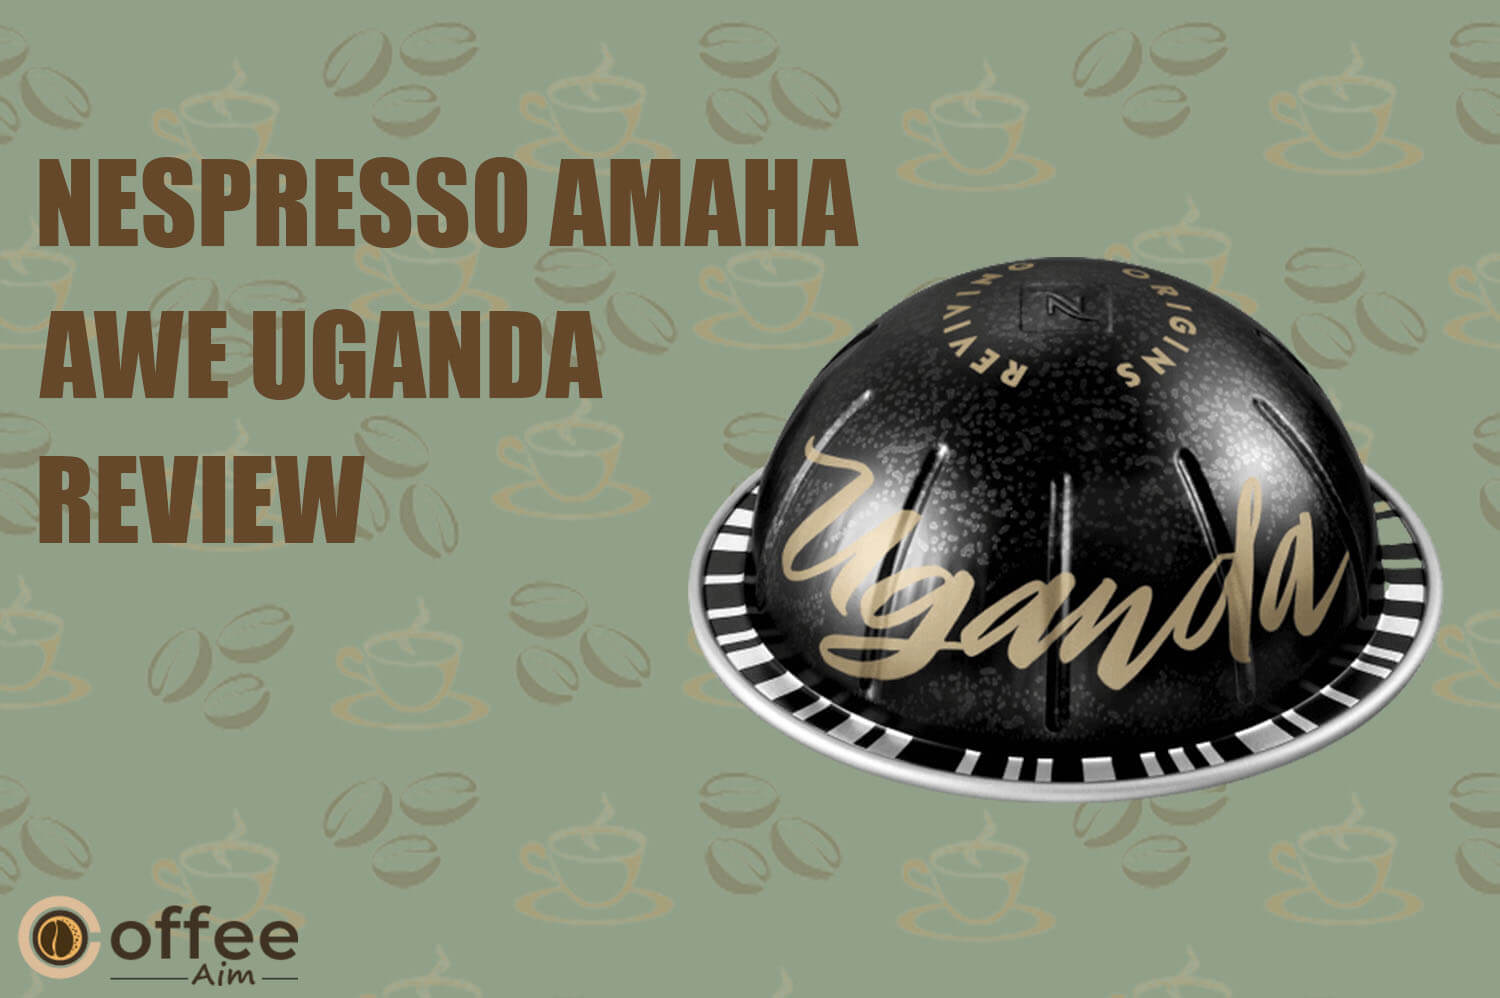 Featured image for the article "Nespresso Amaha Awe Uganda Review"